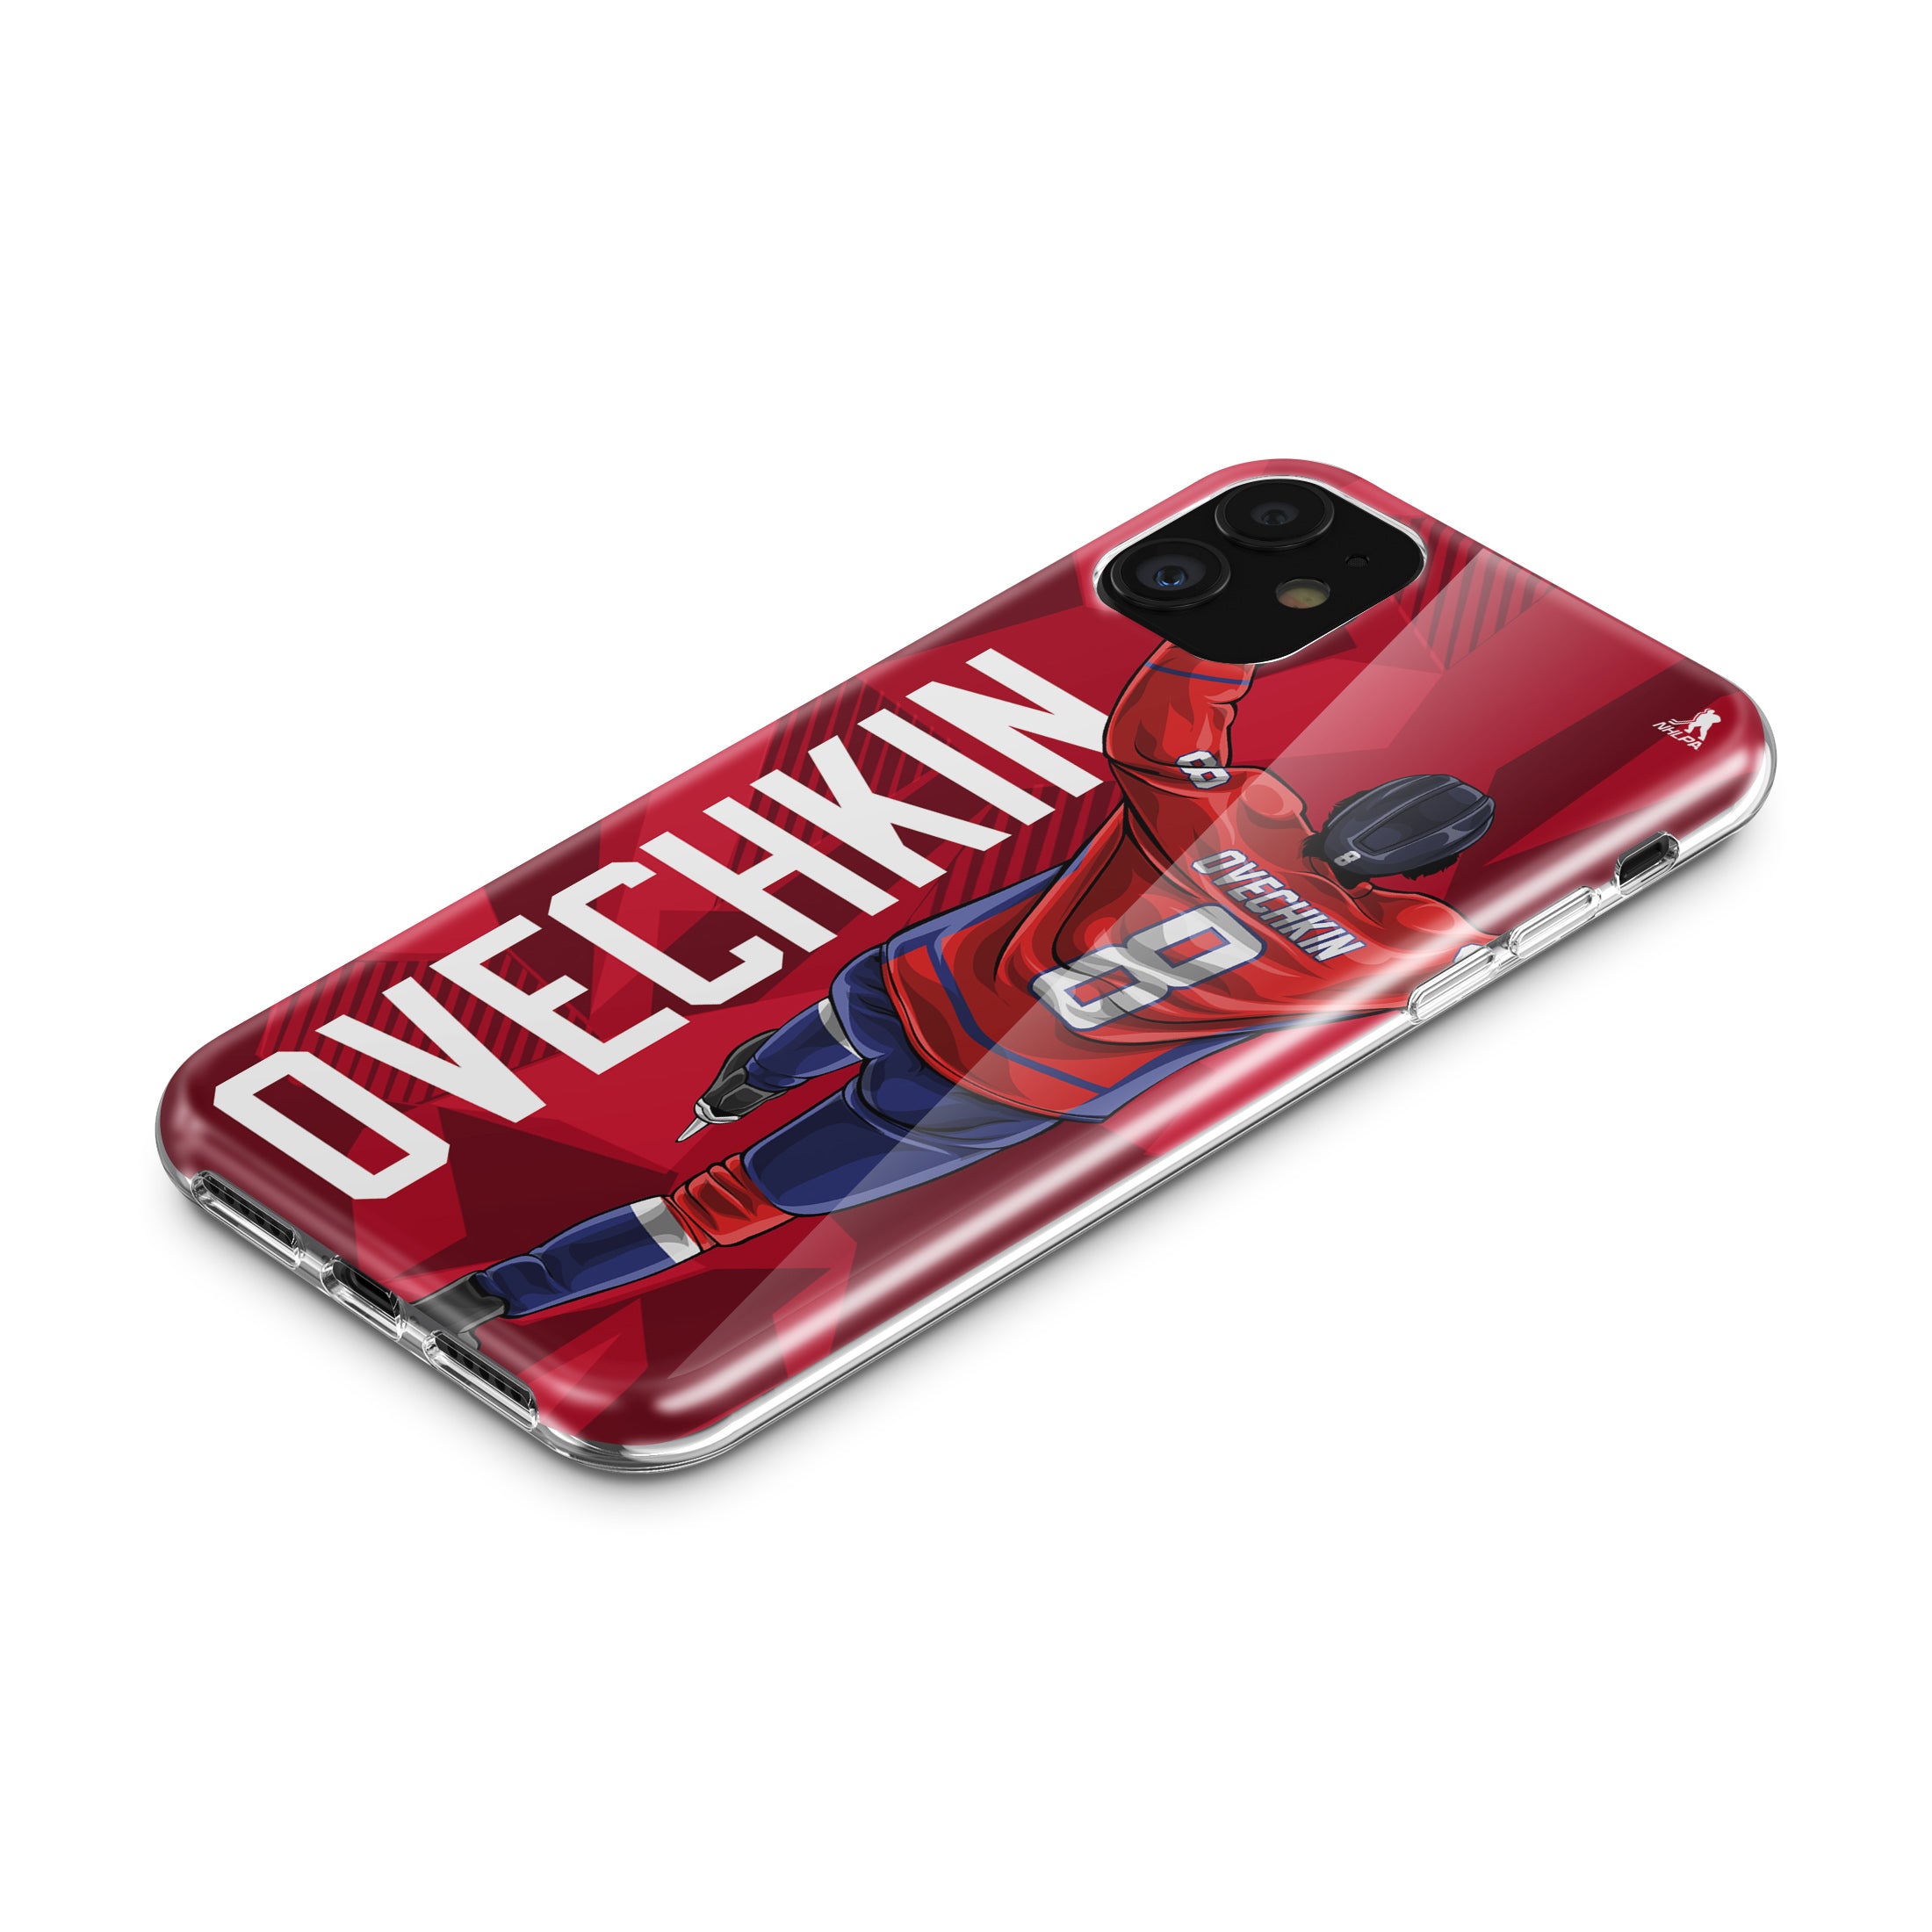 Ovechkin Star Series 2.0 Case